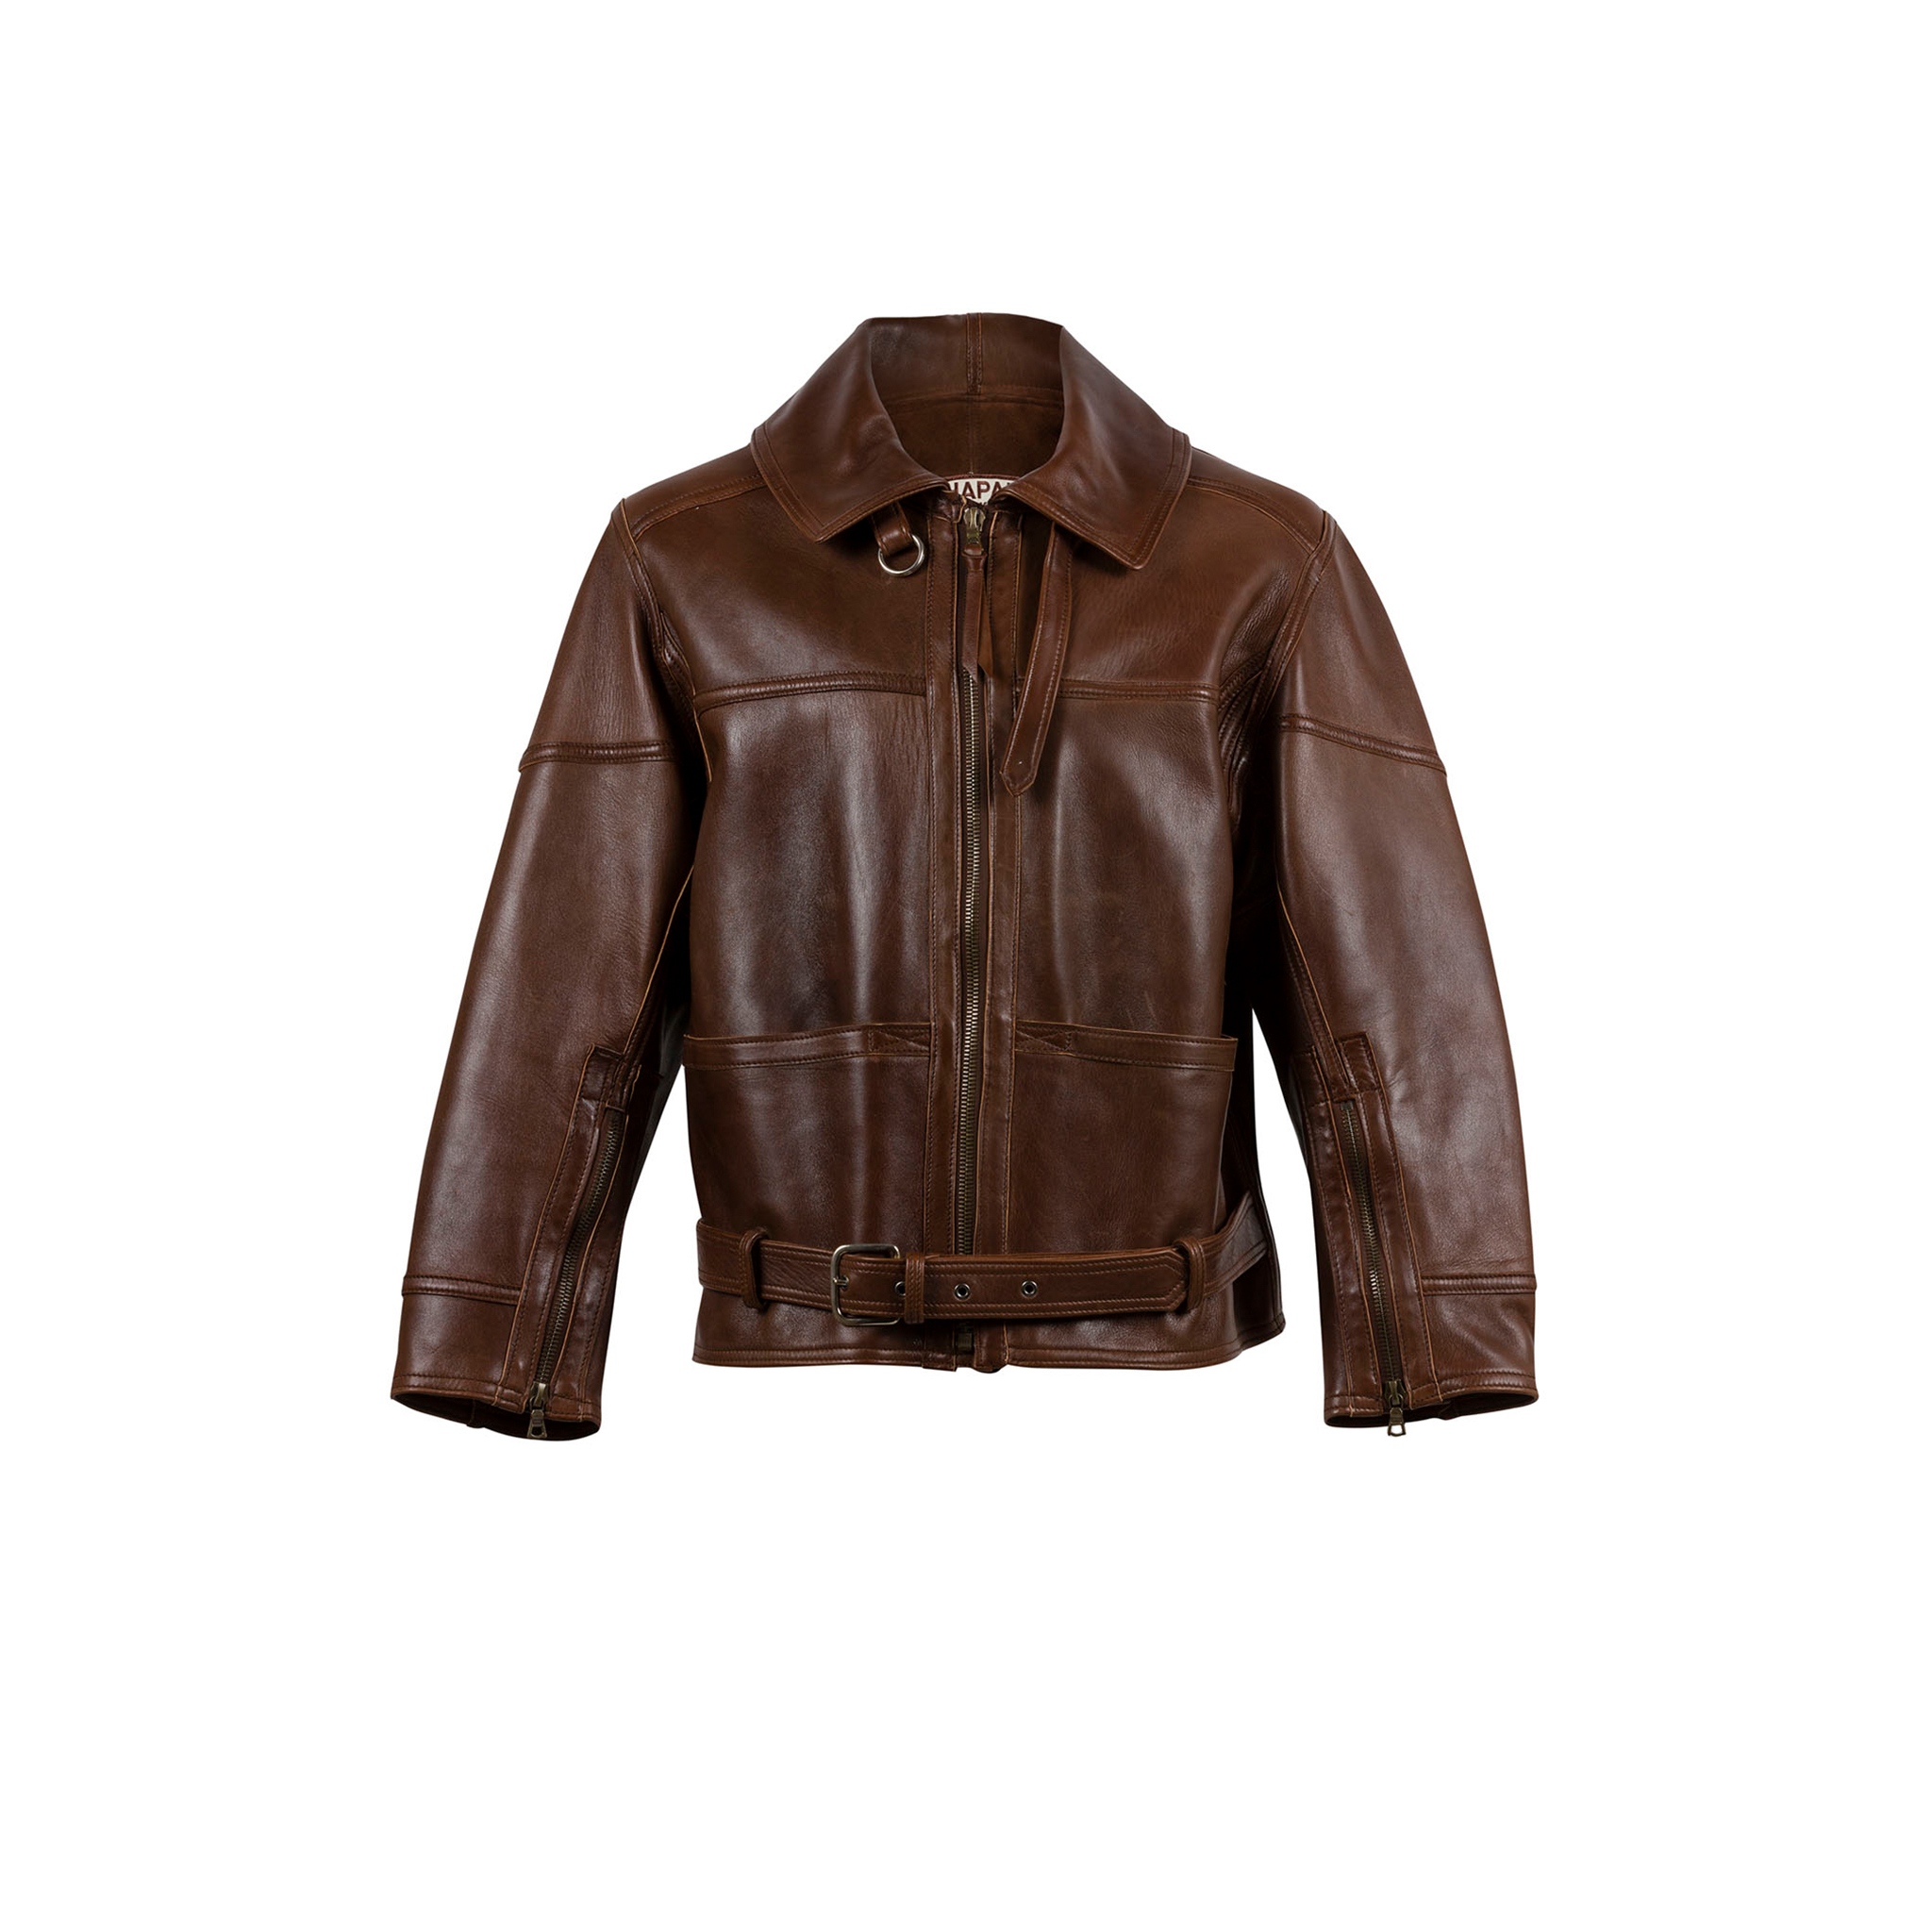 RAF Jacket - Glossy leather - Brown color